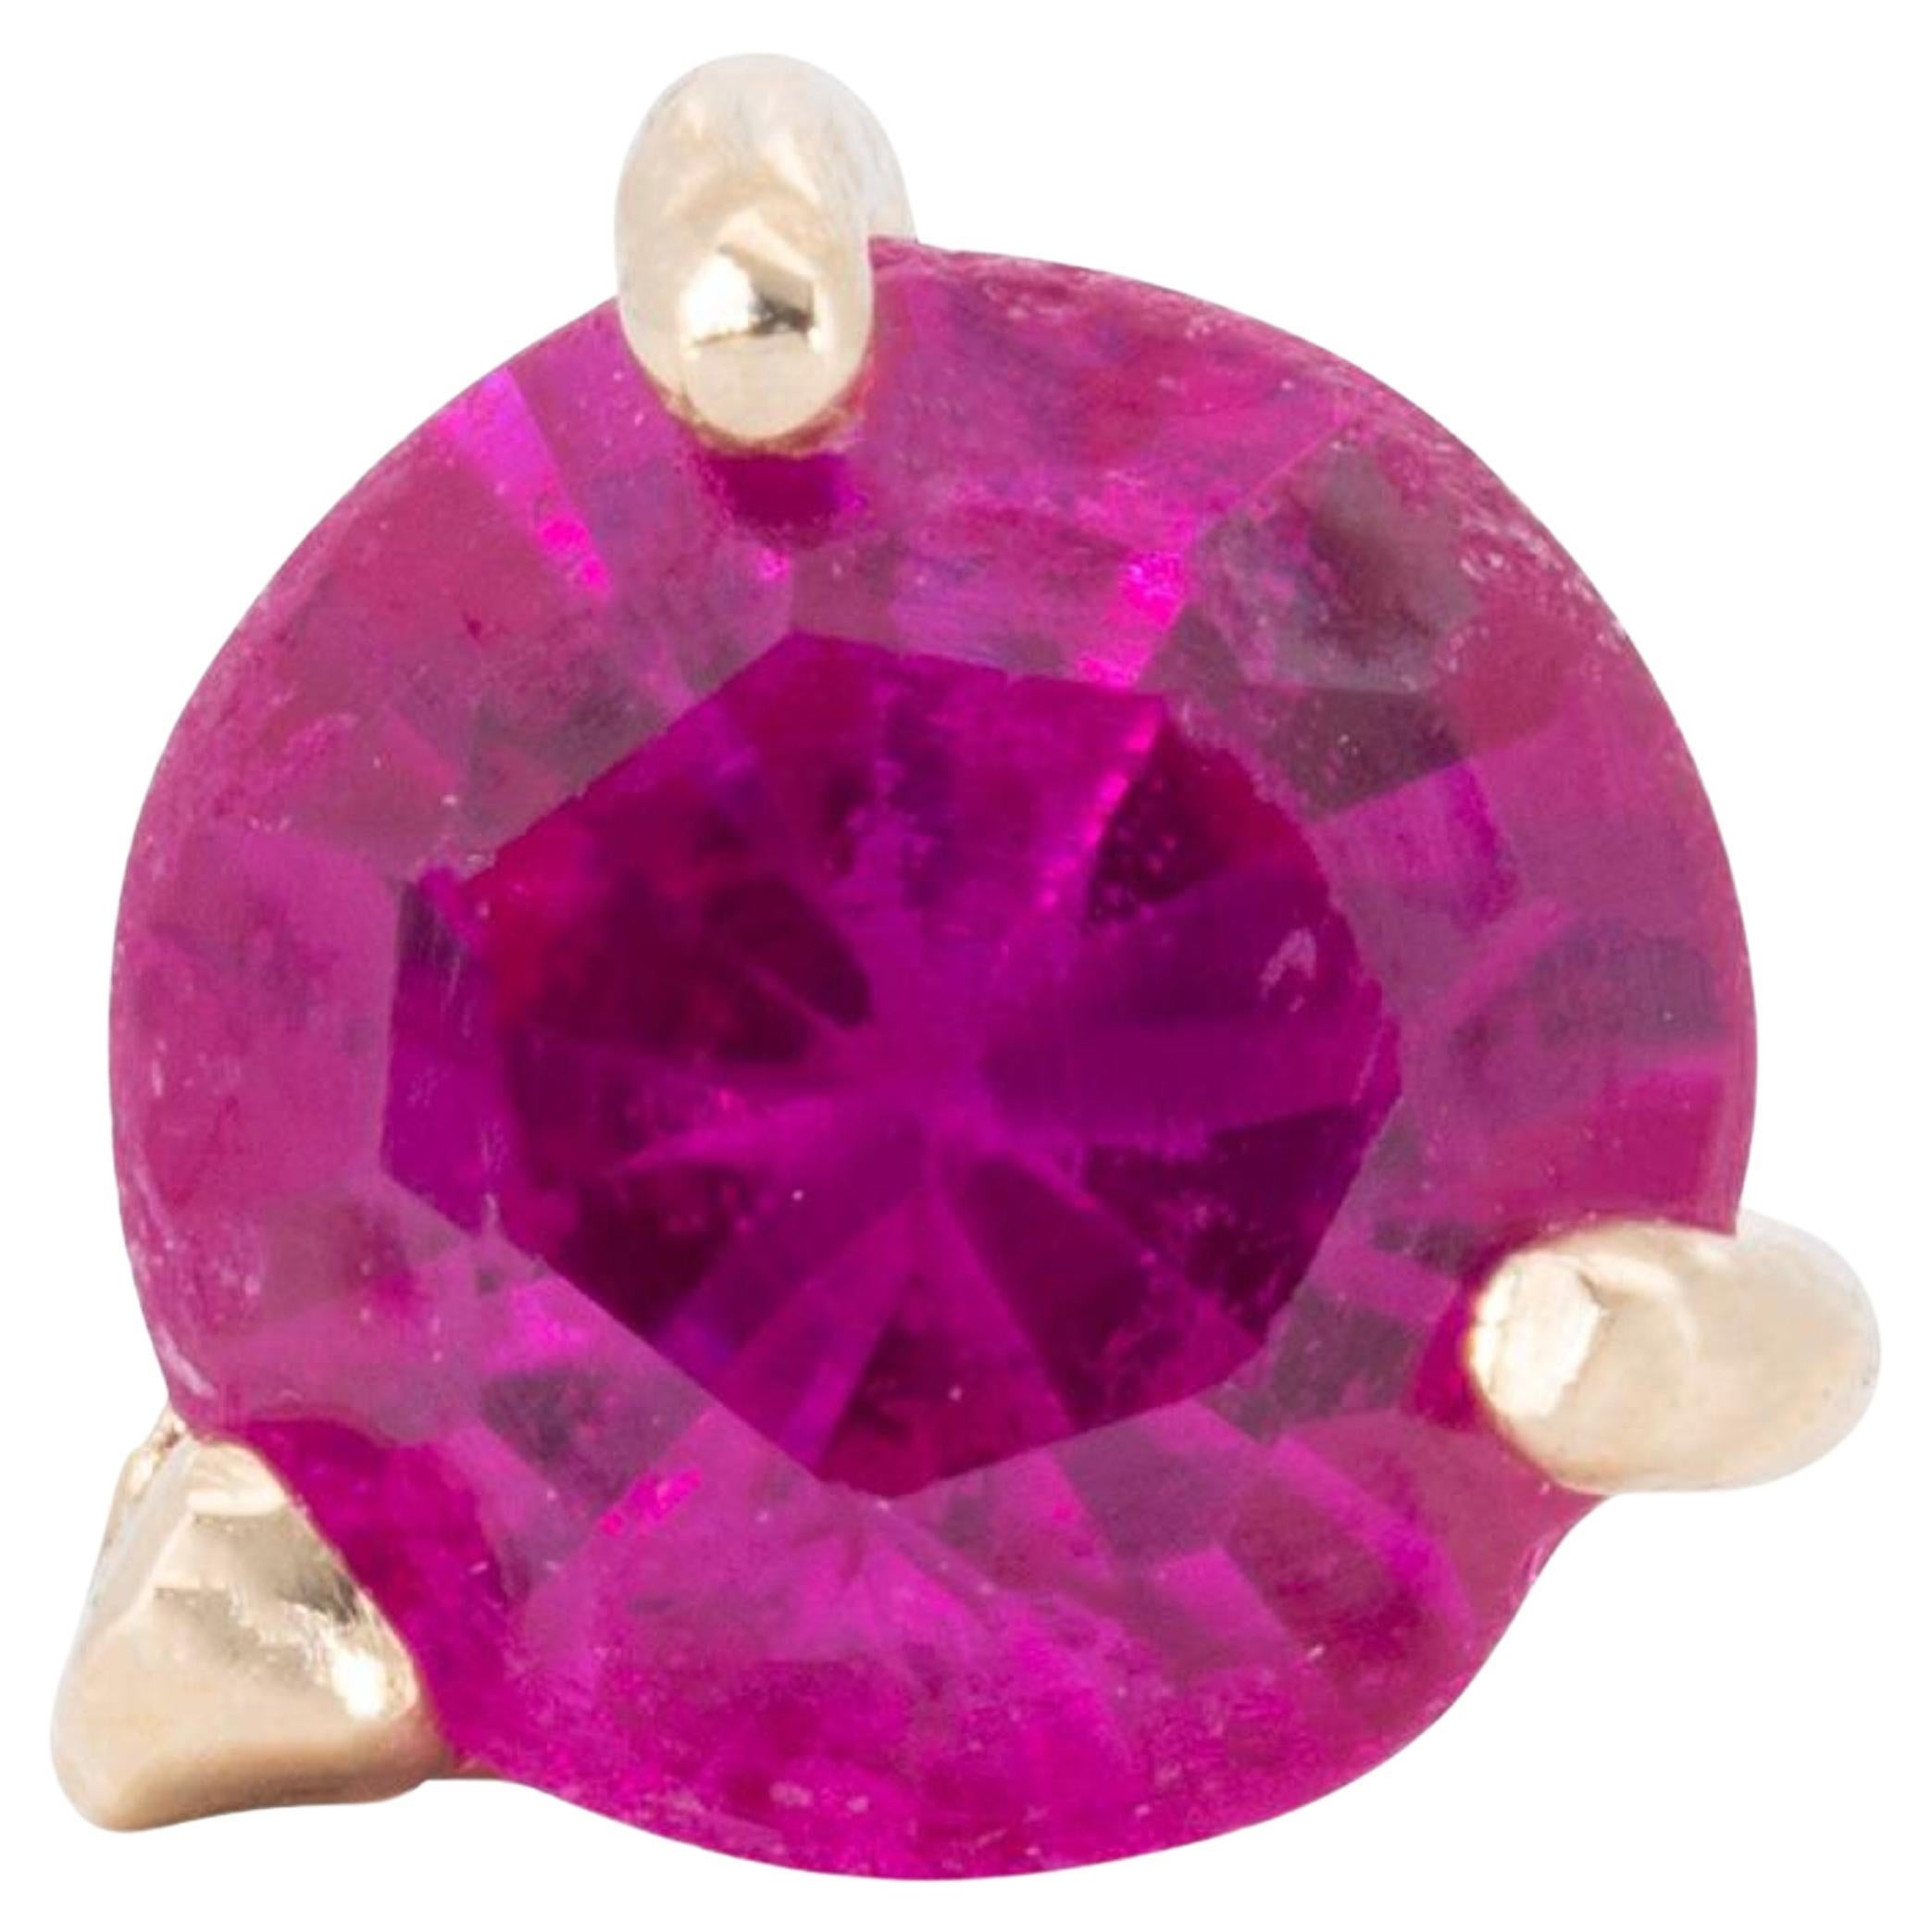 Luxurious 0.03 ct. Round Ruby Nose Piercing For Sale